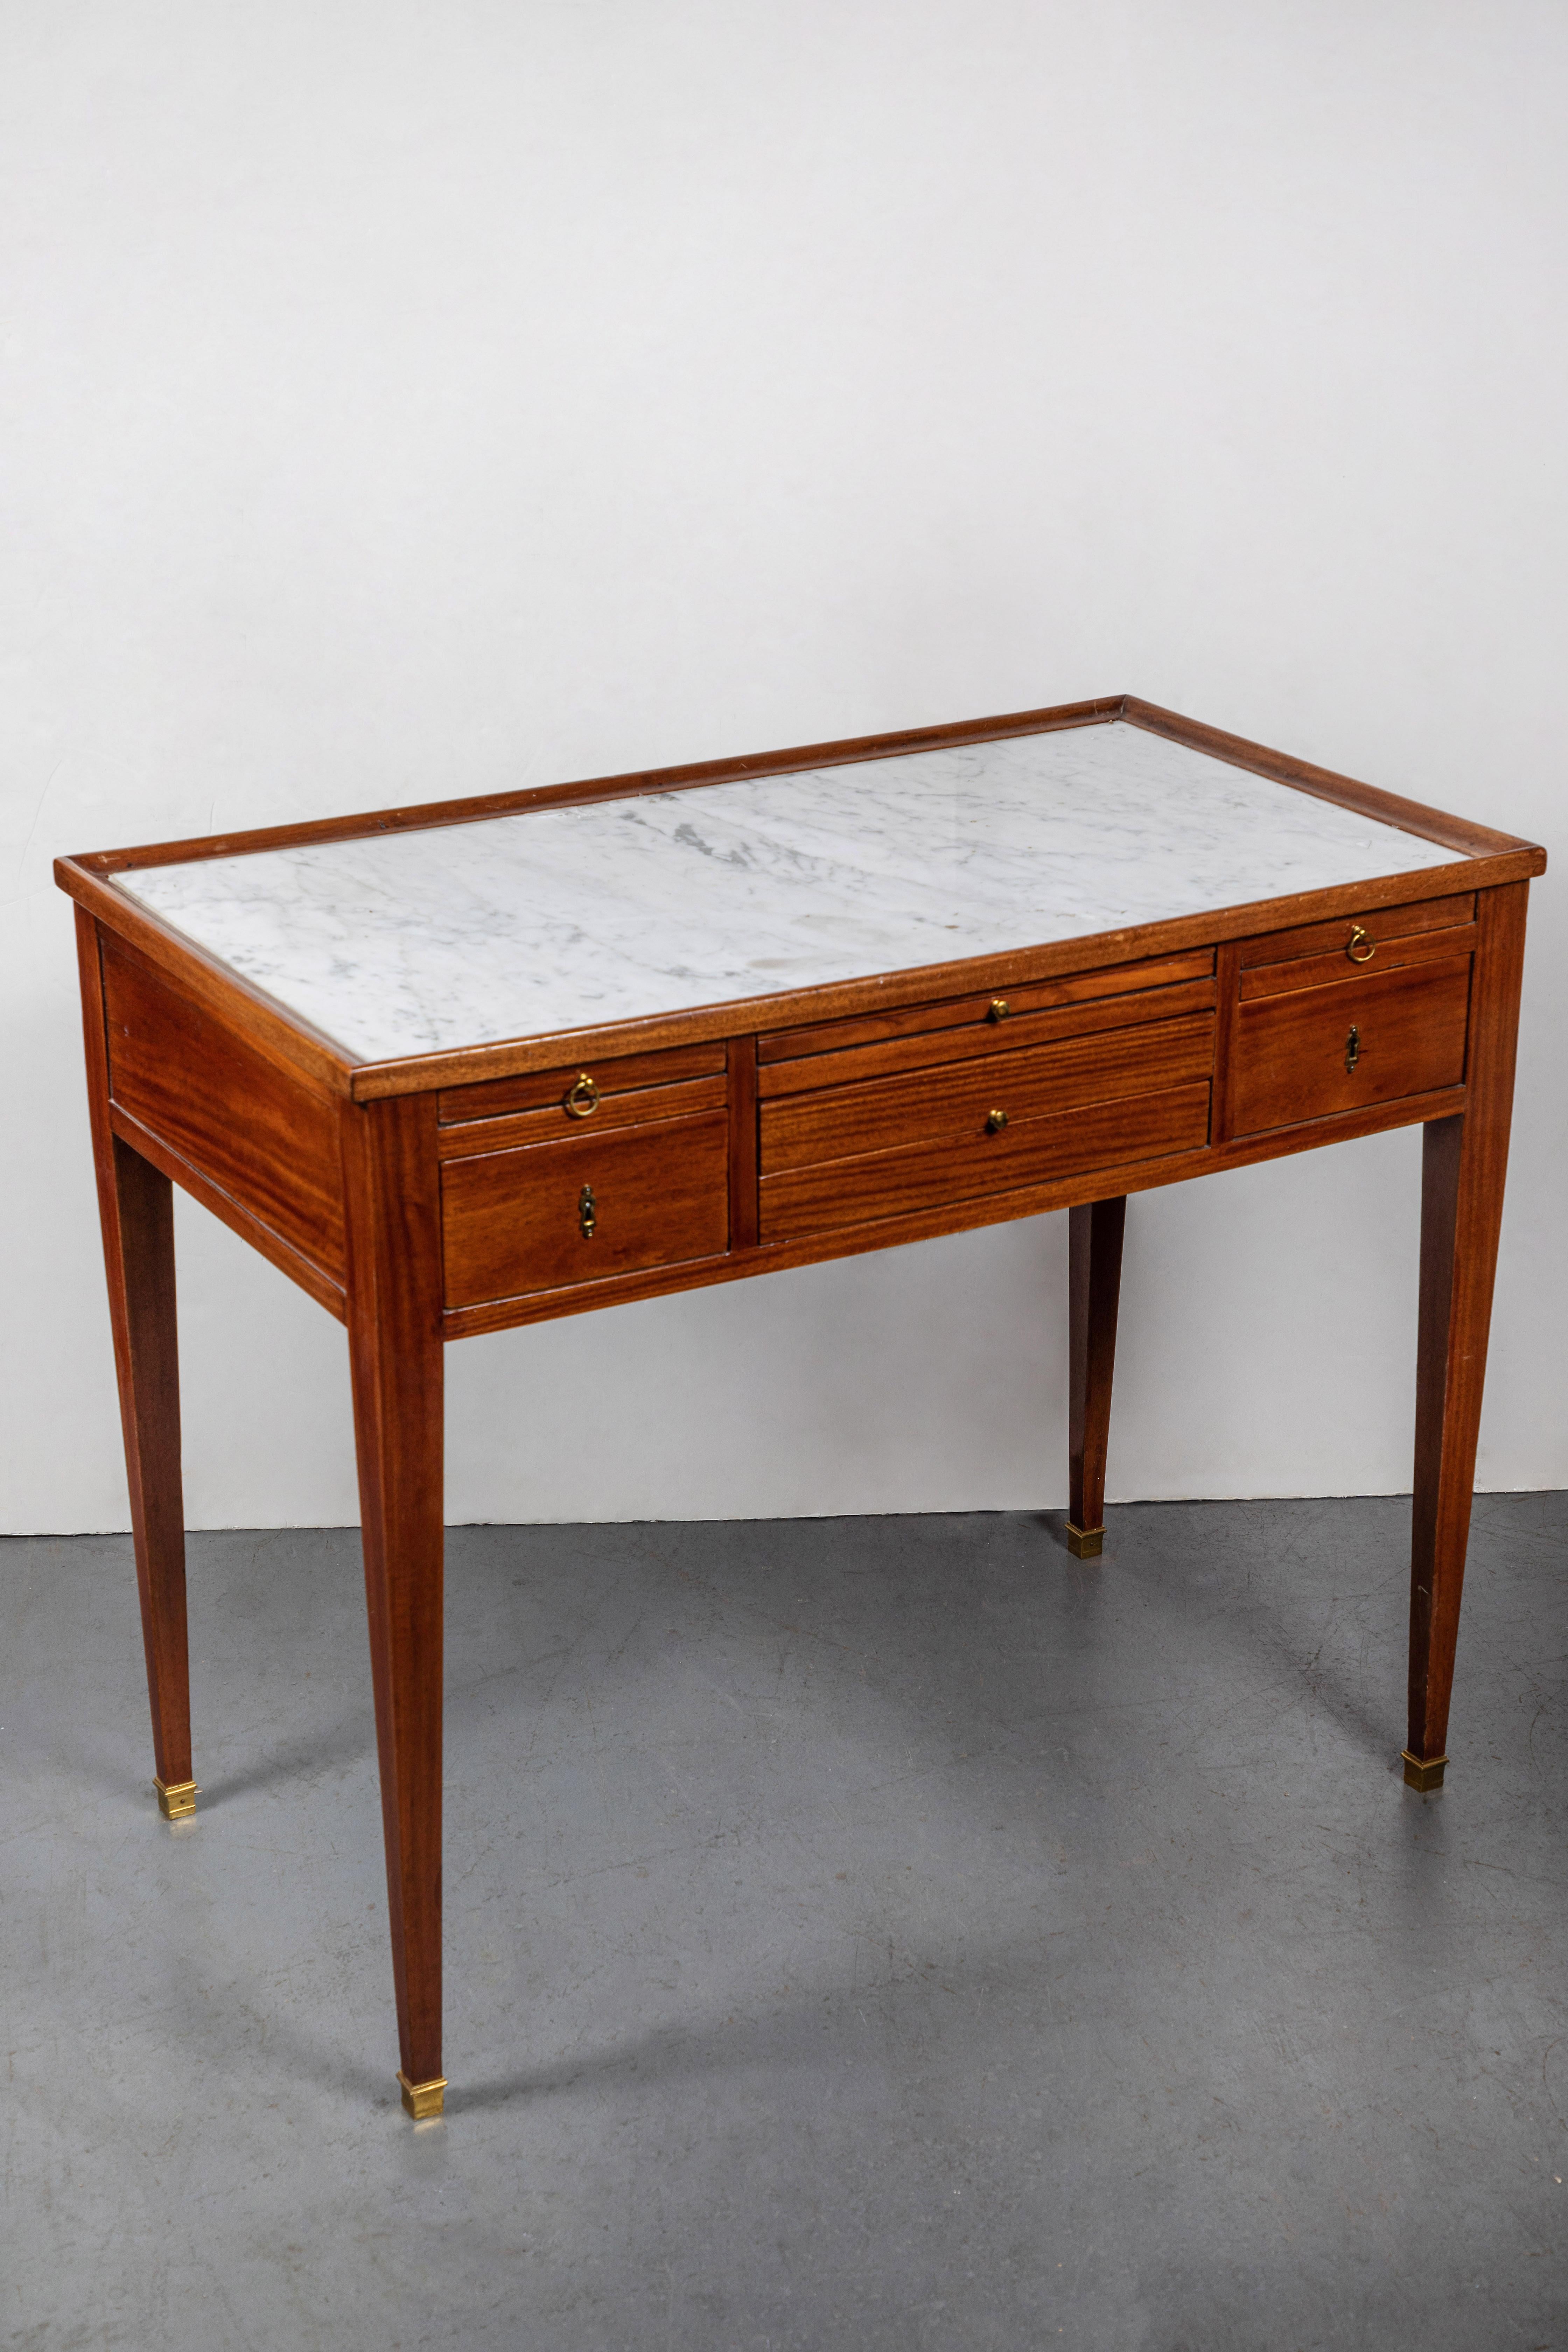 Wonderful, circa 1780, hand carved, petite writing desk inset with game chess and backgammon game boards. The top featuring its original, inset marble. The whole on tapered legs terminating in ormolu feet.